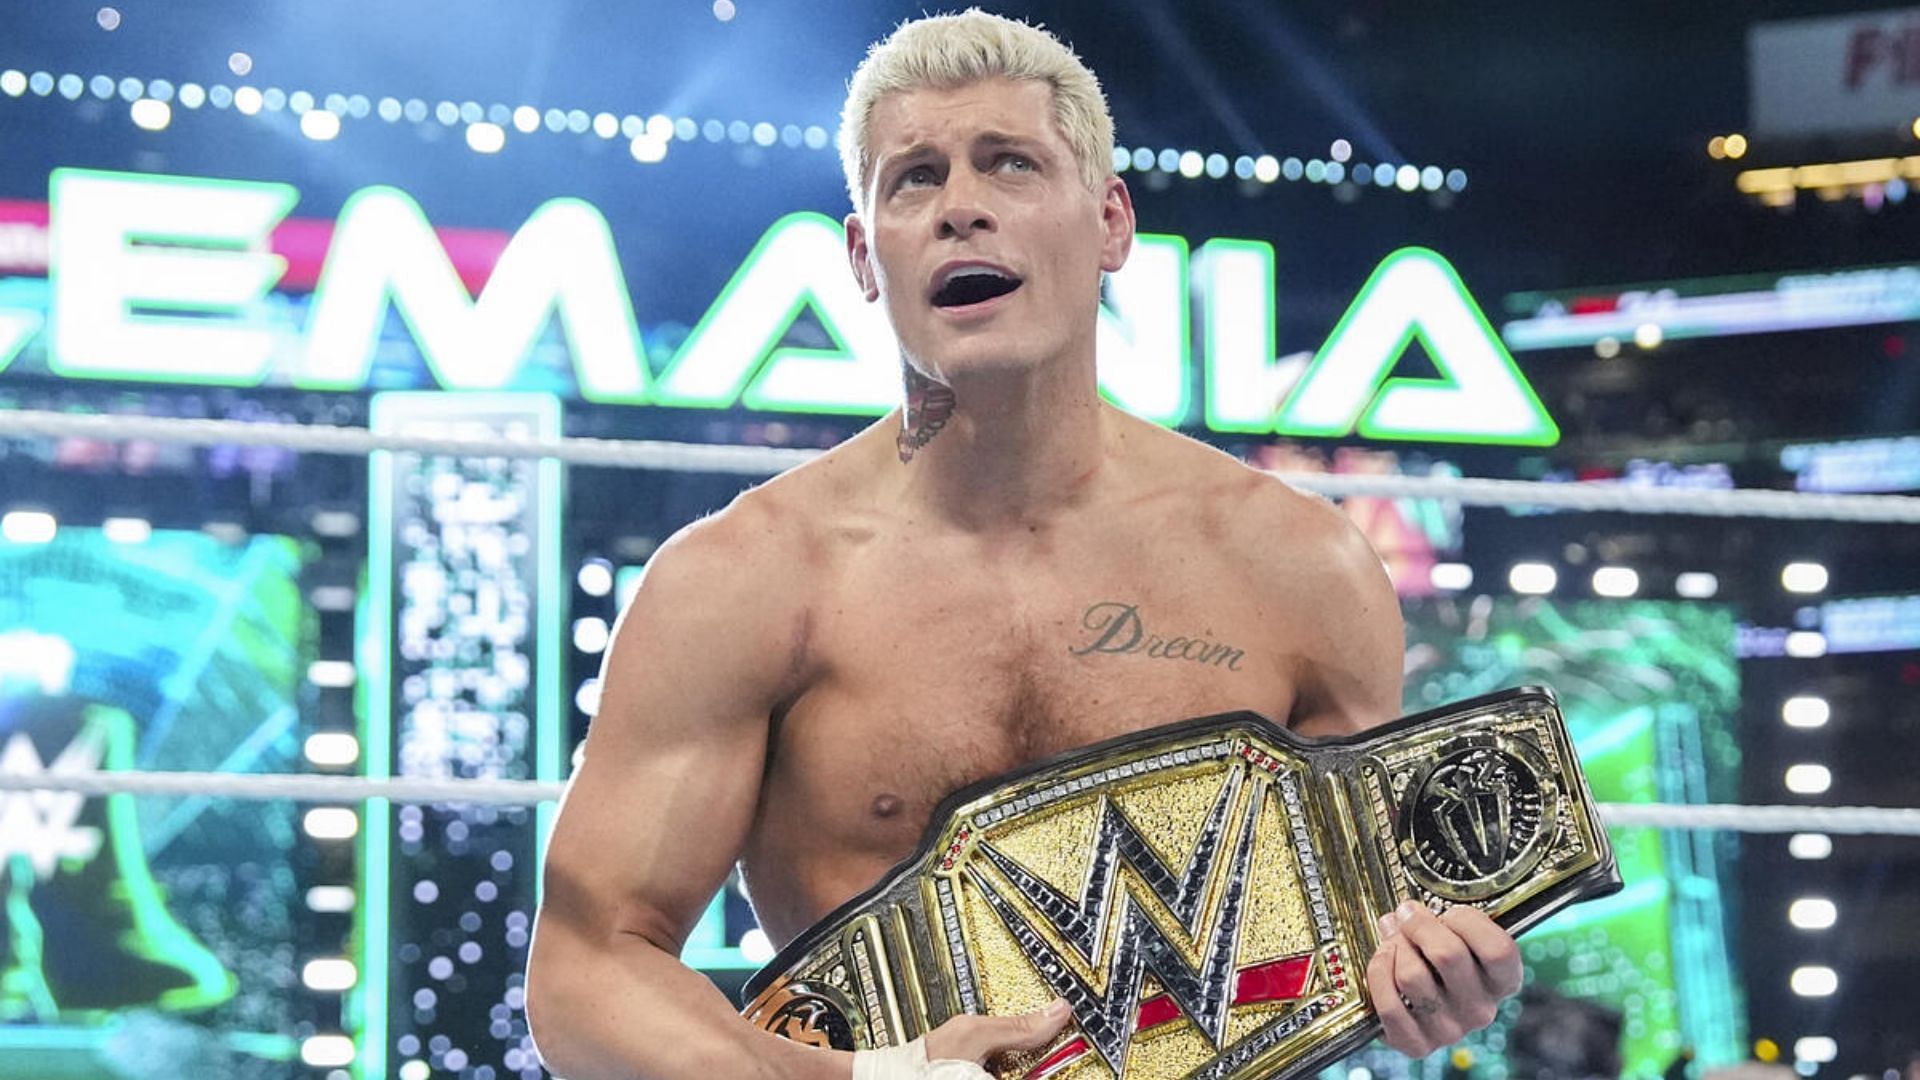 Cody Rhodes is leading the new era in WWE